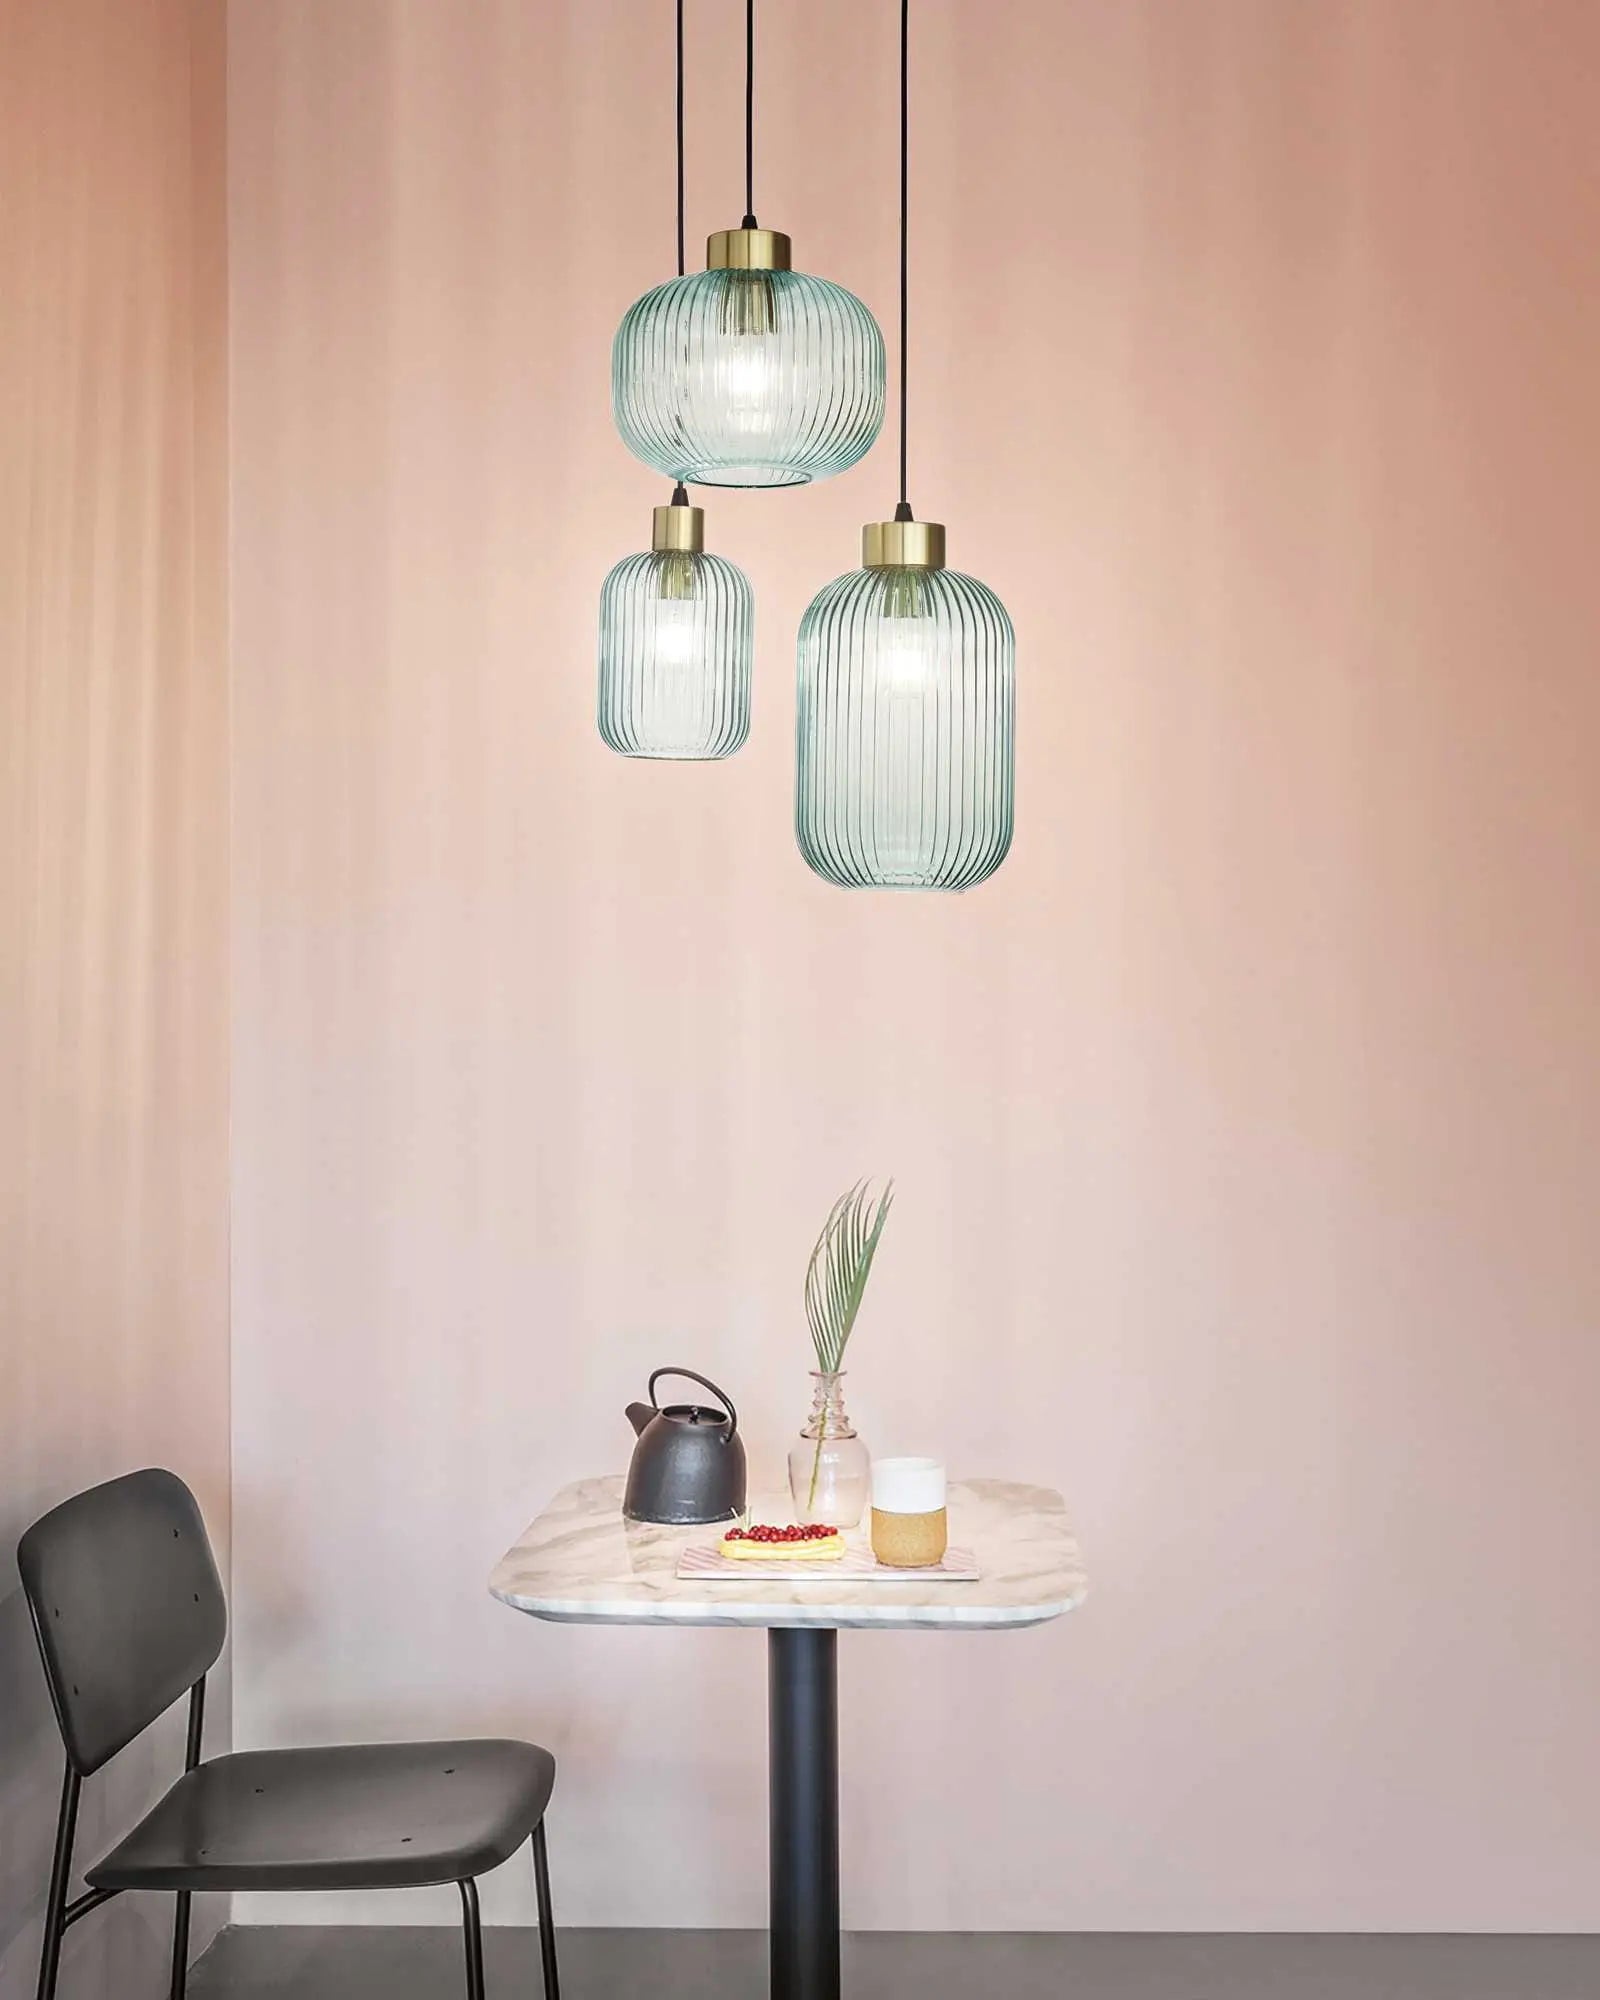 Mint Blown glass pendant light cluster above a table